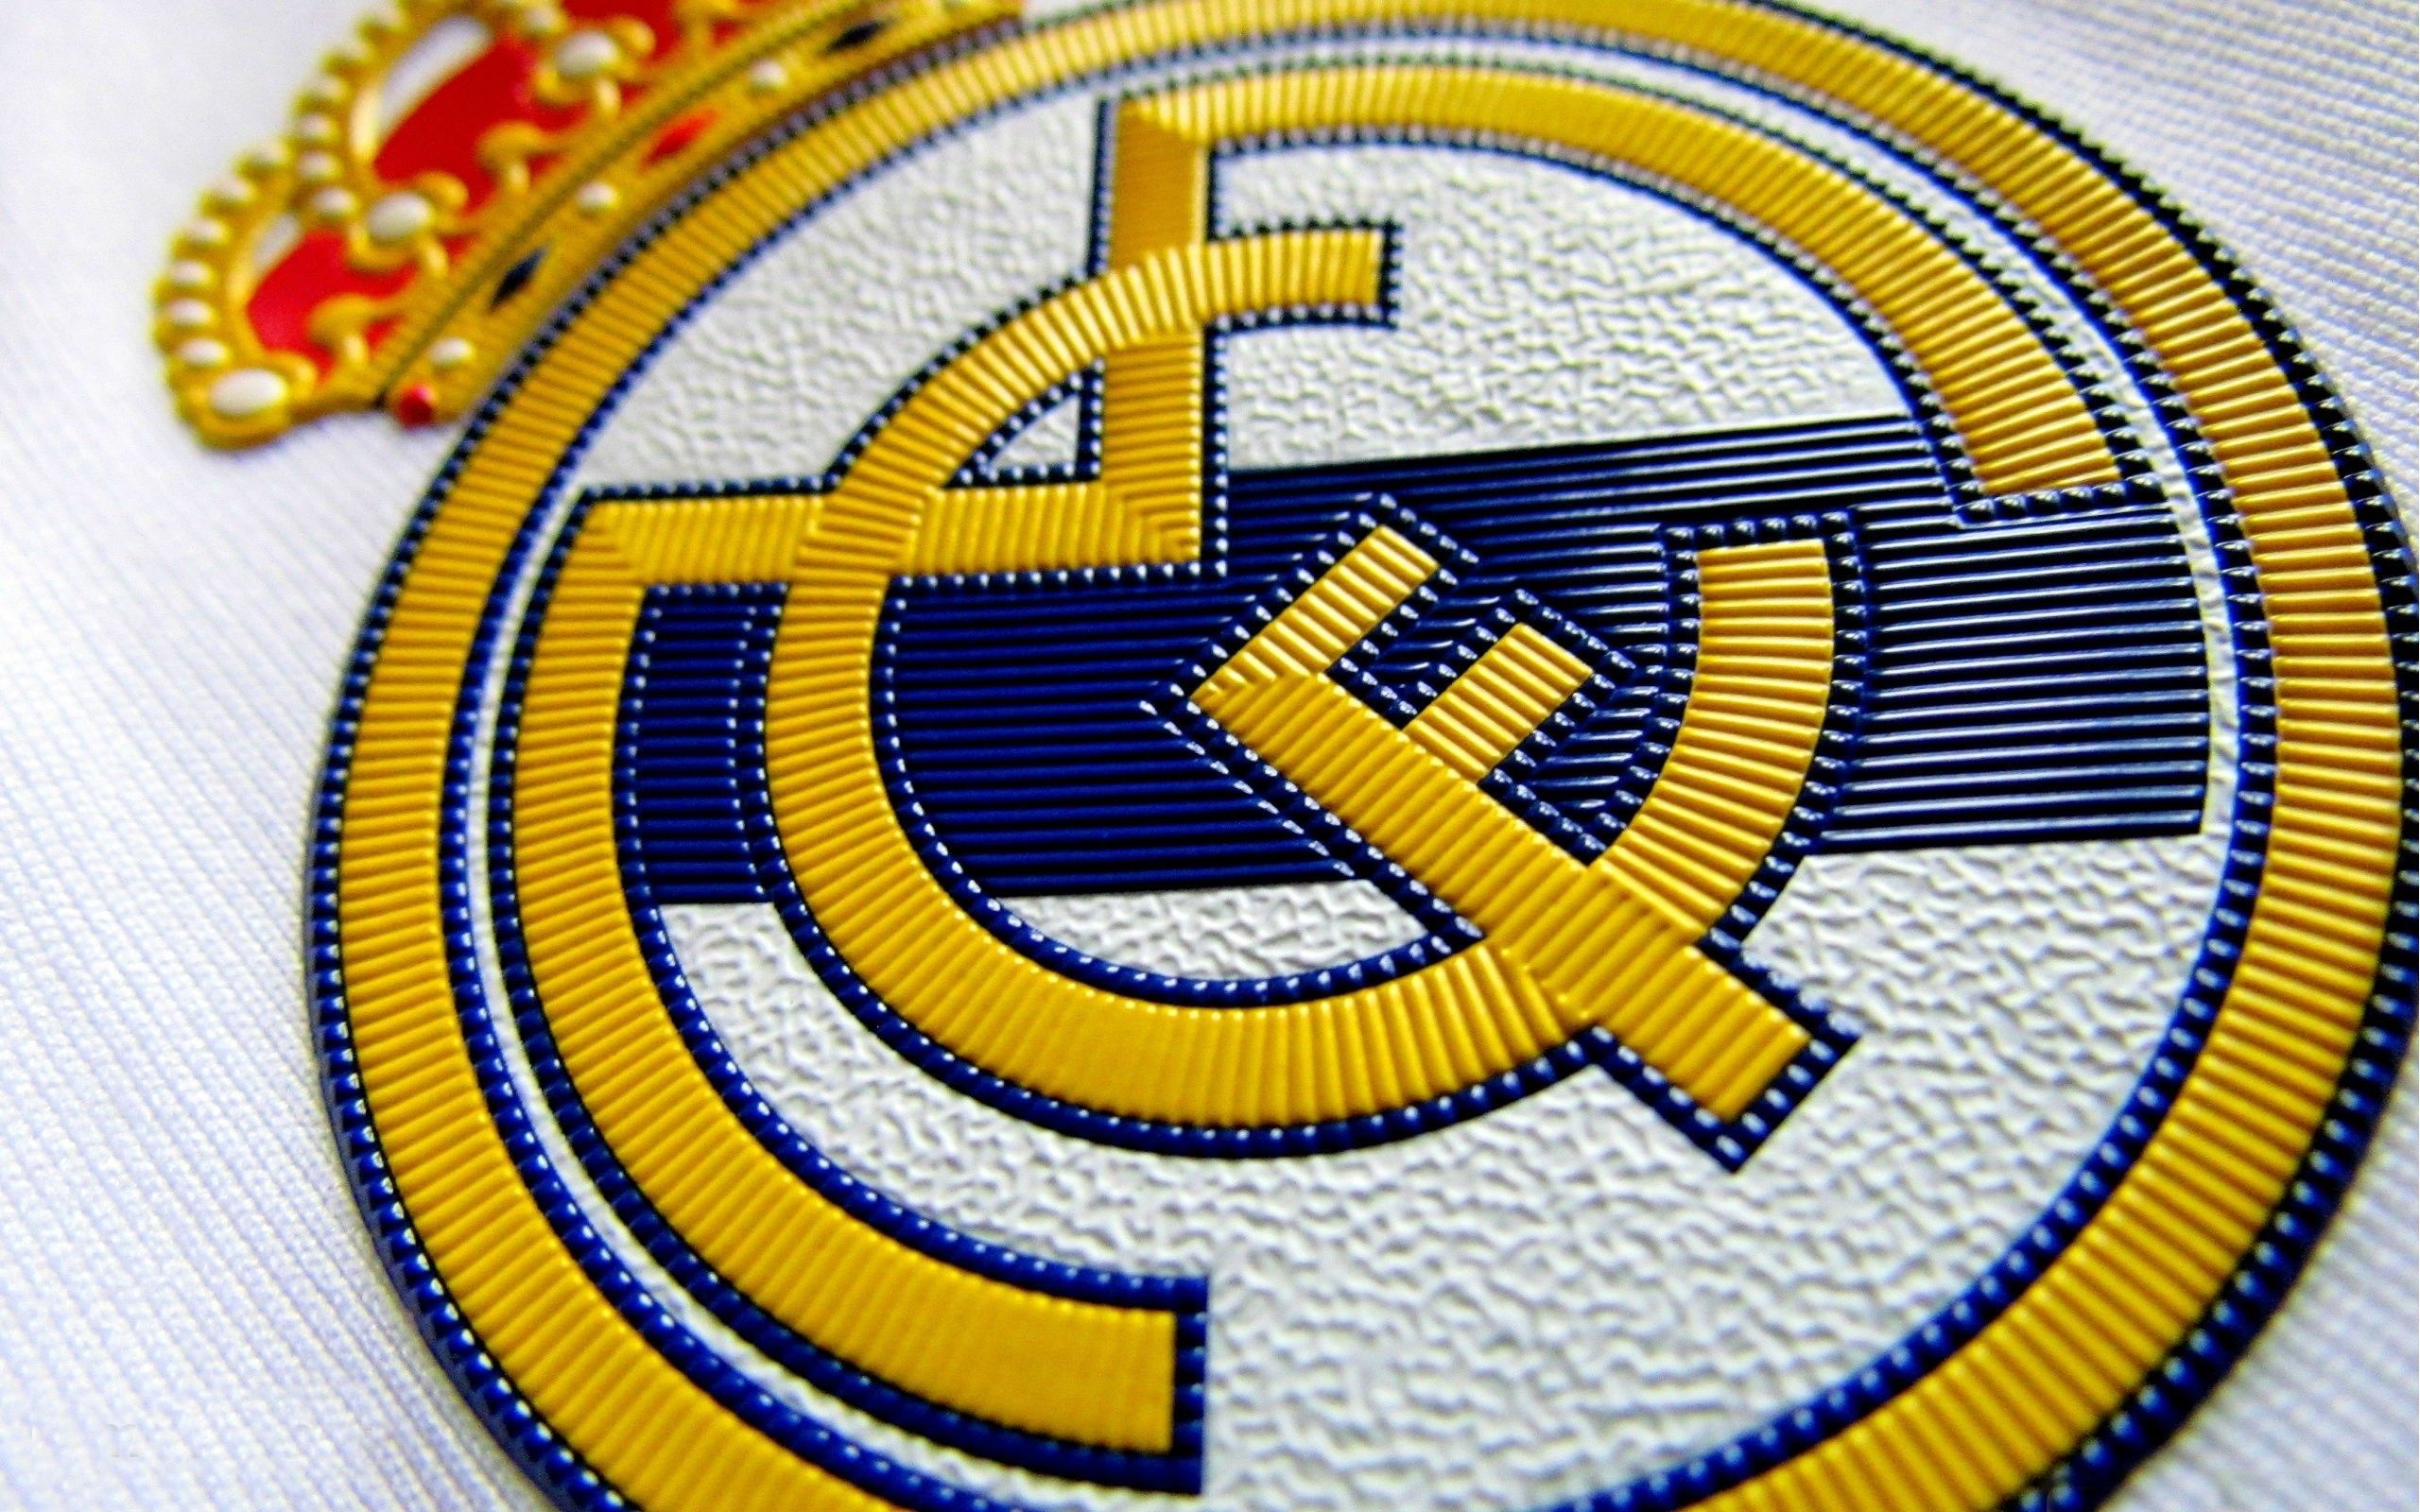 Real Madrid Logo 2016 Football Club | Wallpapers, Backgrounds ...